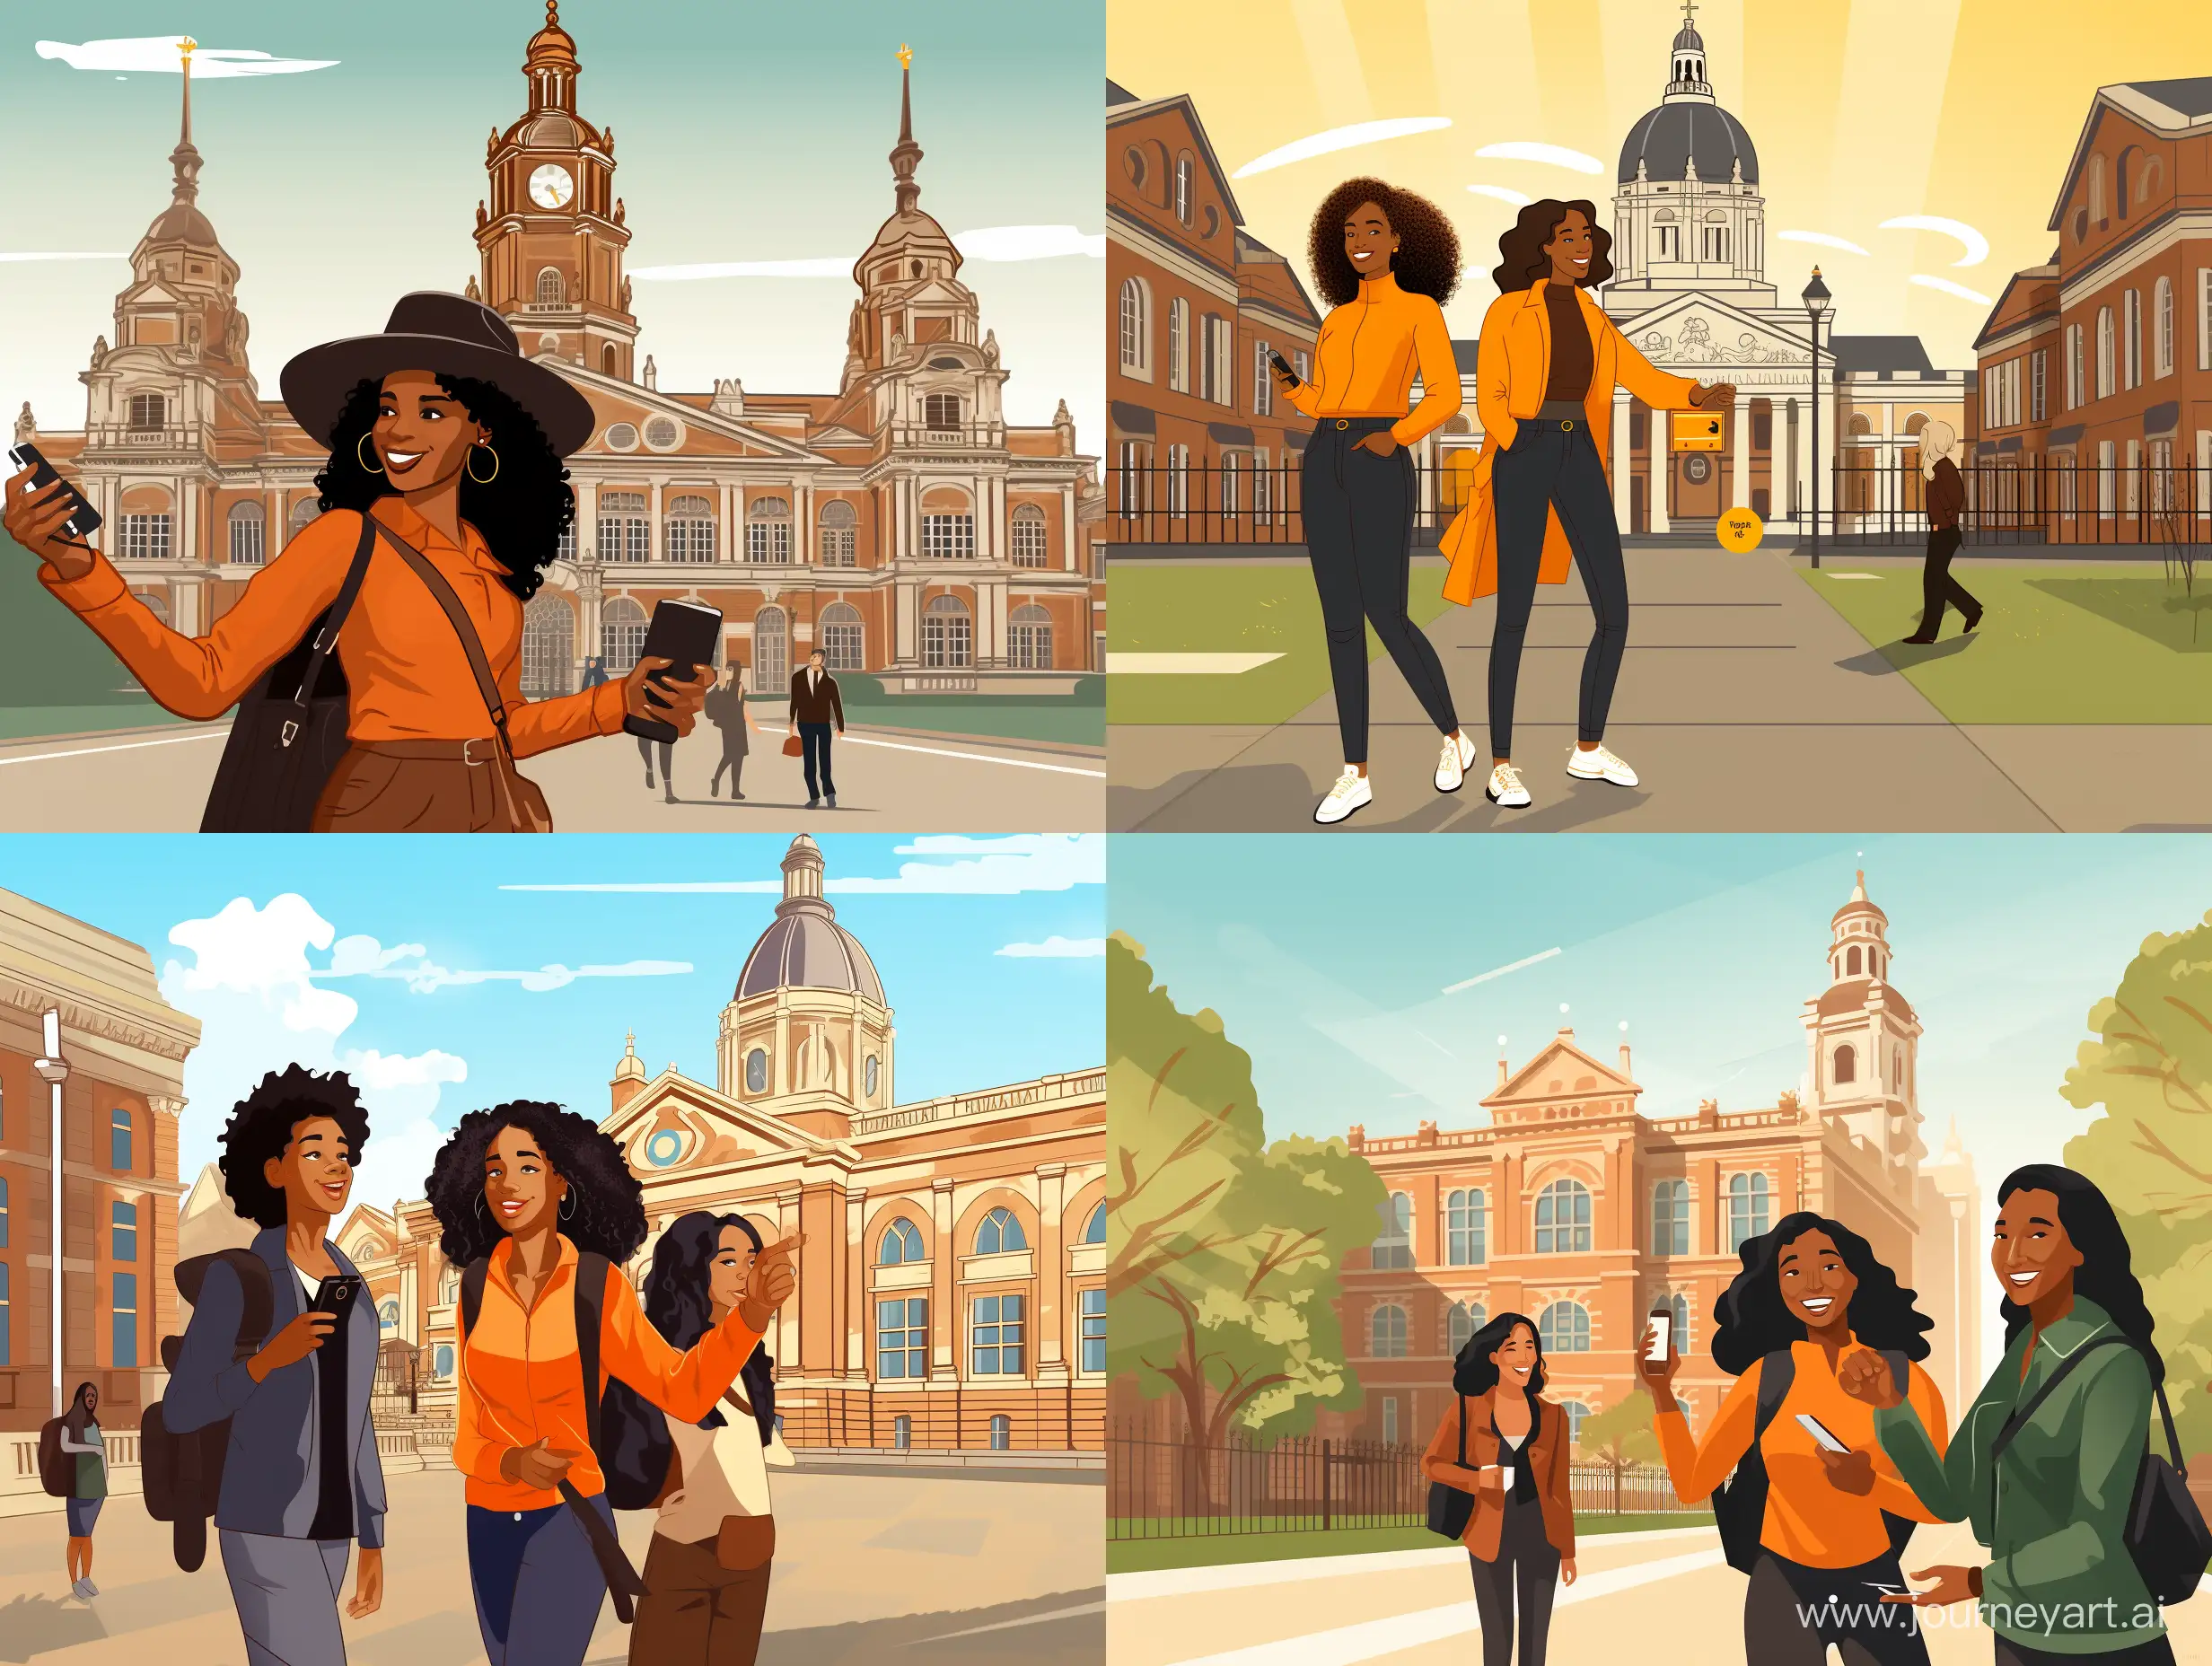 Vibrant-Cartoon-Style-Black-Woman-Tour-Guide-Leading-Group-at-Lambeth-Town-Hall